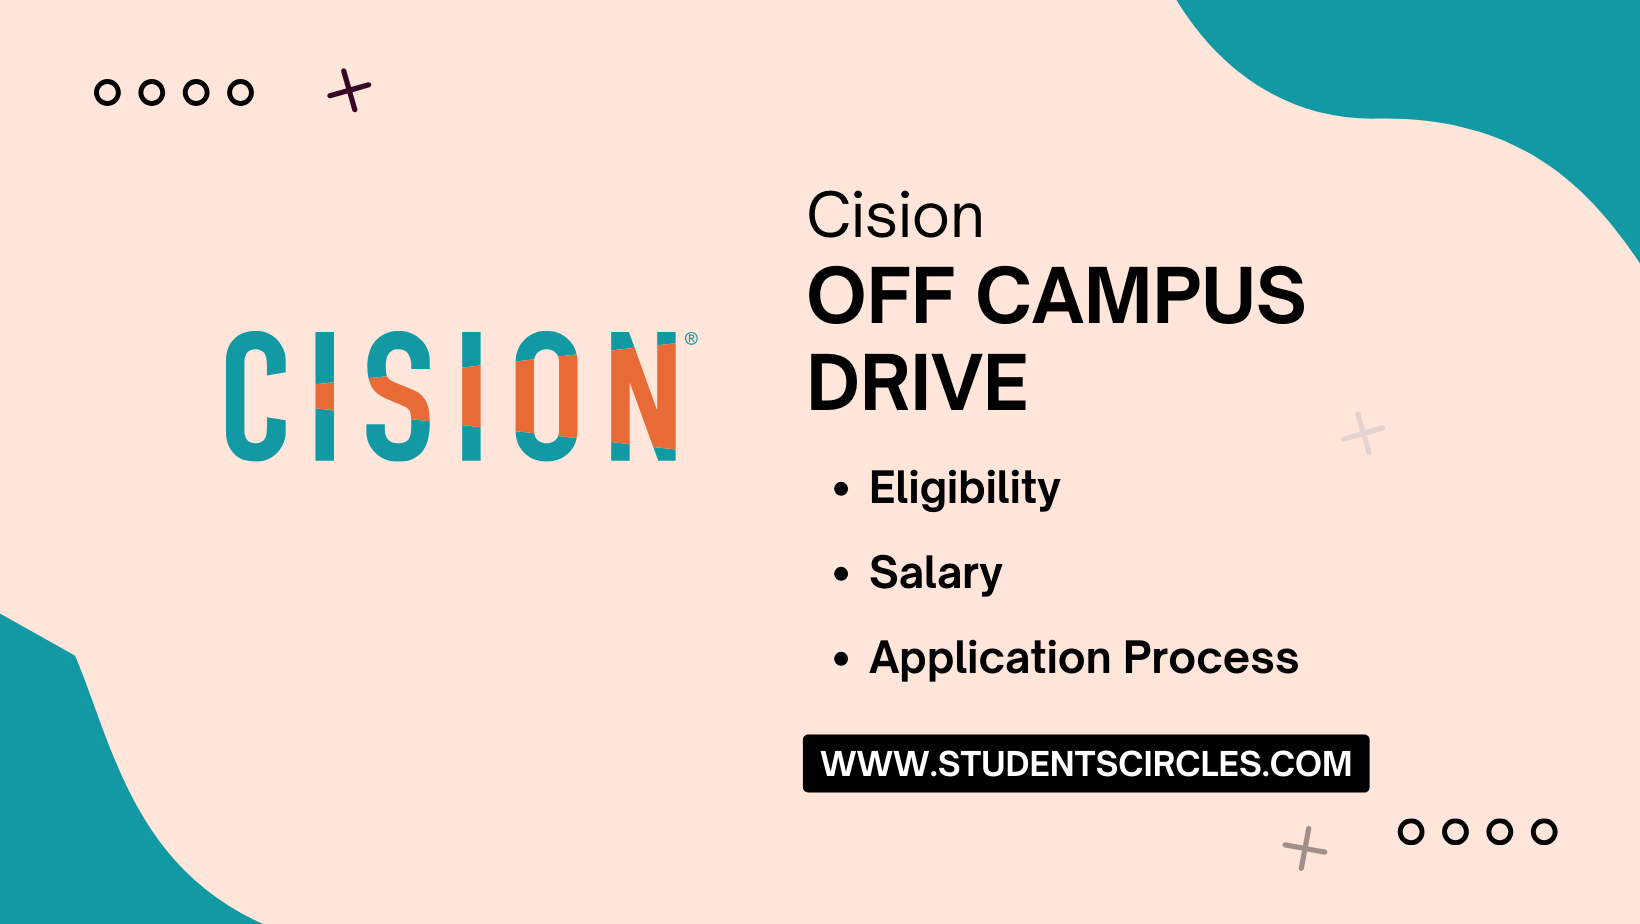 Cision Off Campus Drive